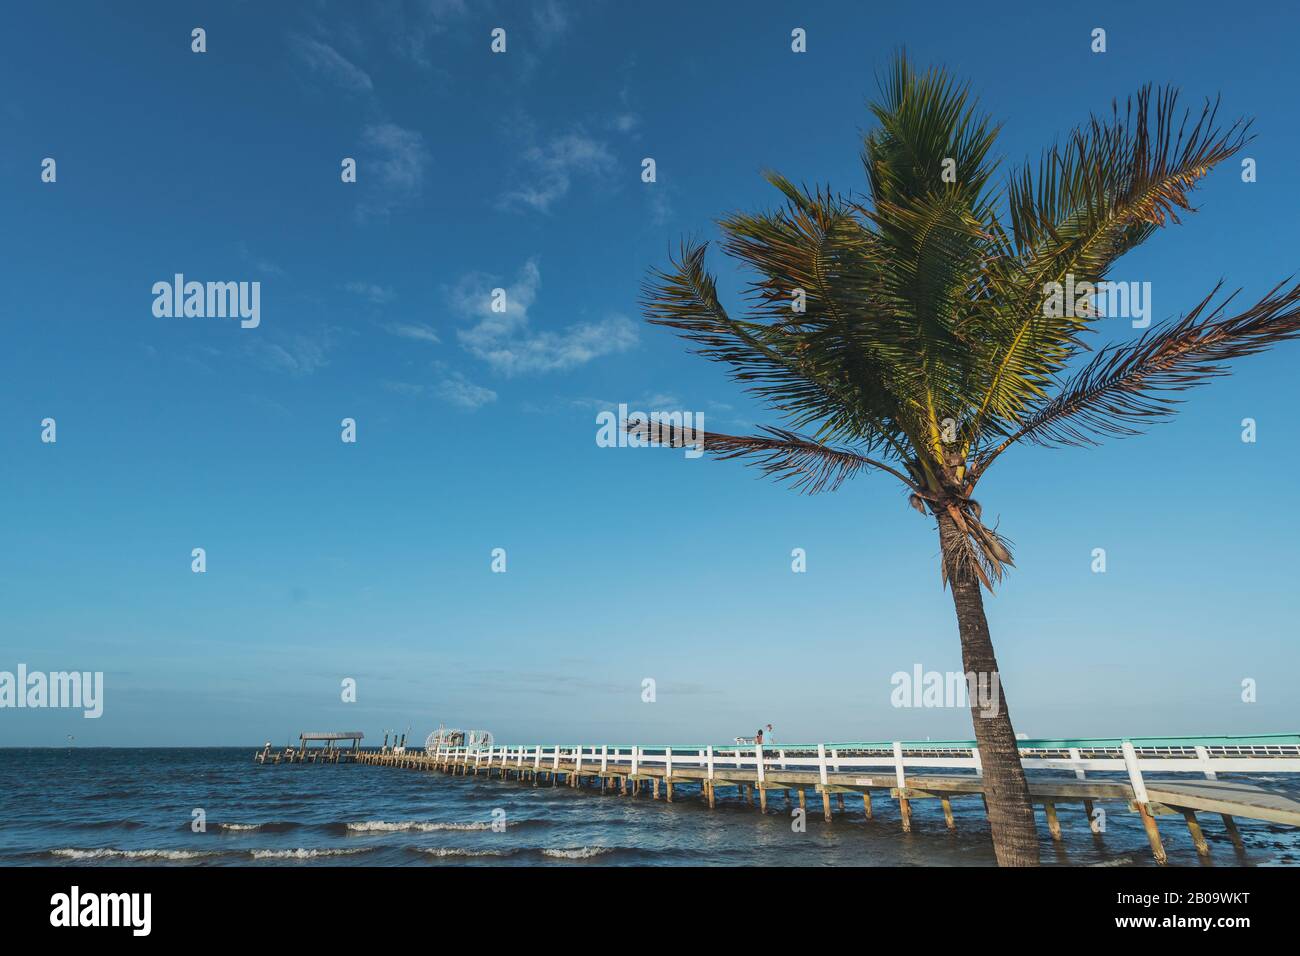 PINE ISLAND, FLORIDA - JAN 17, 2020. Wind whips up palm tree in front of Bokeelia pier. Stock Photo